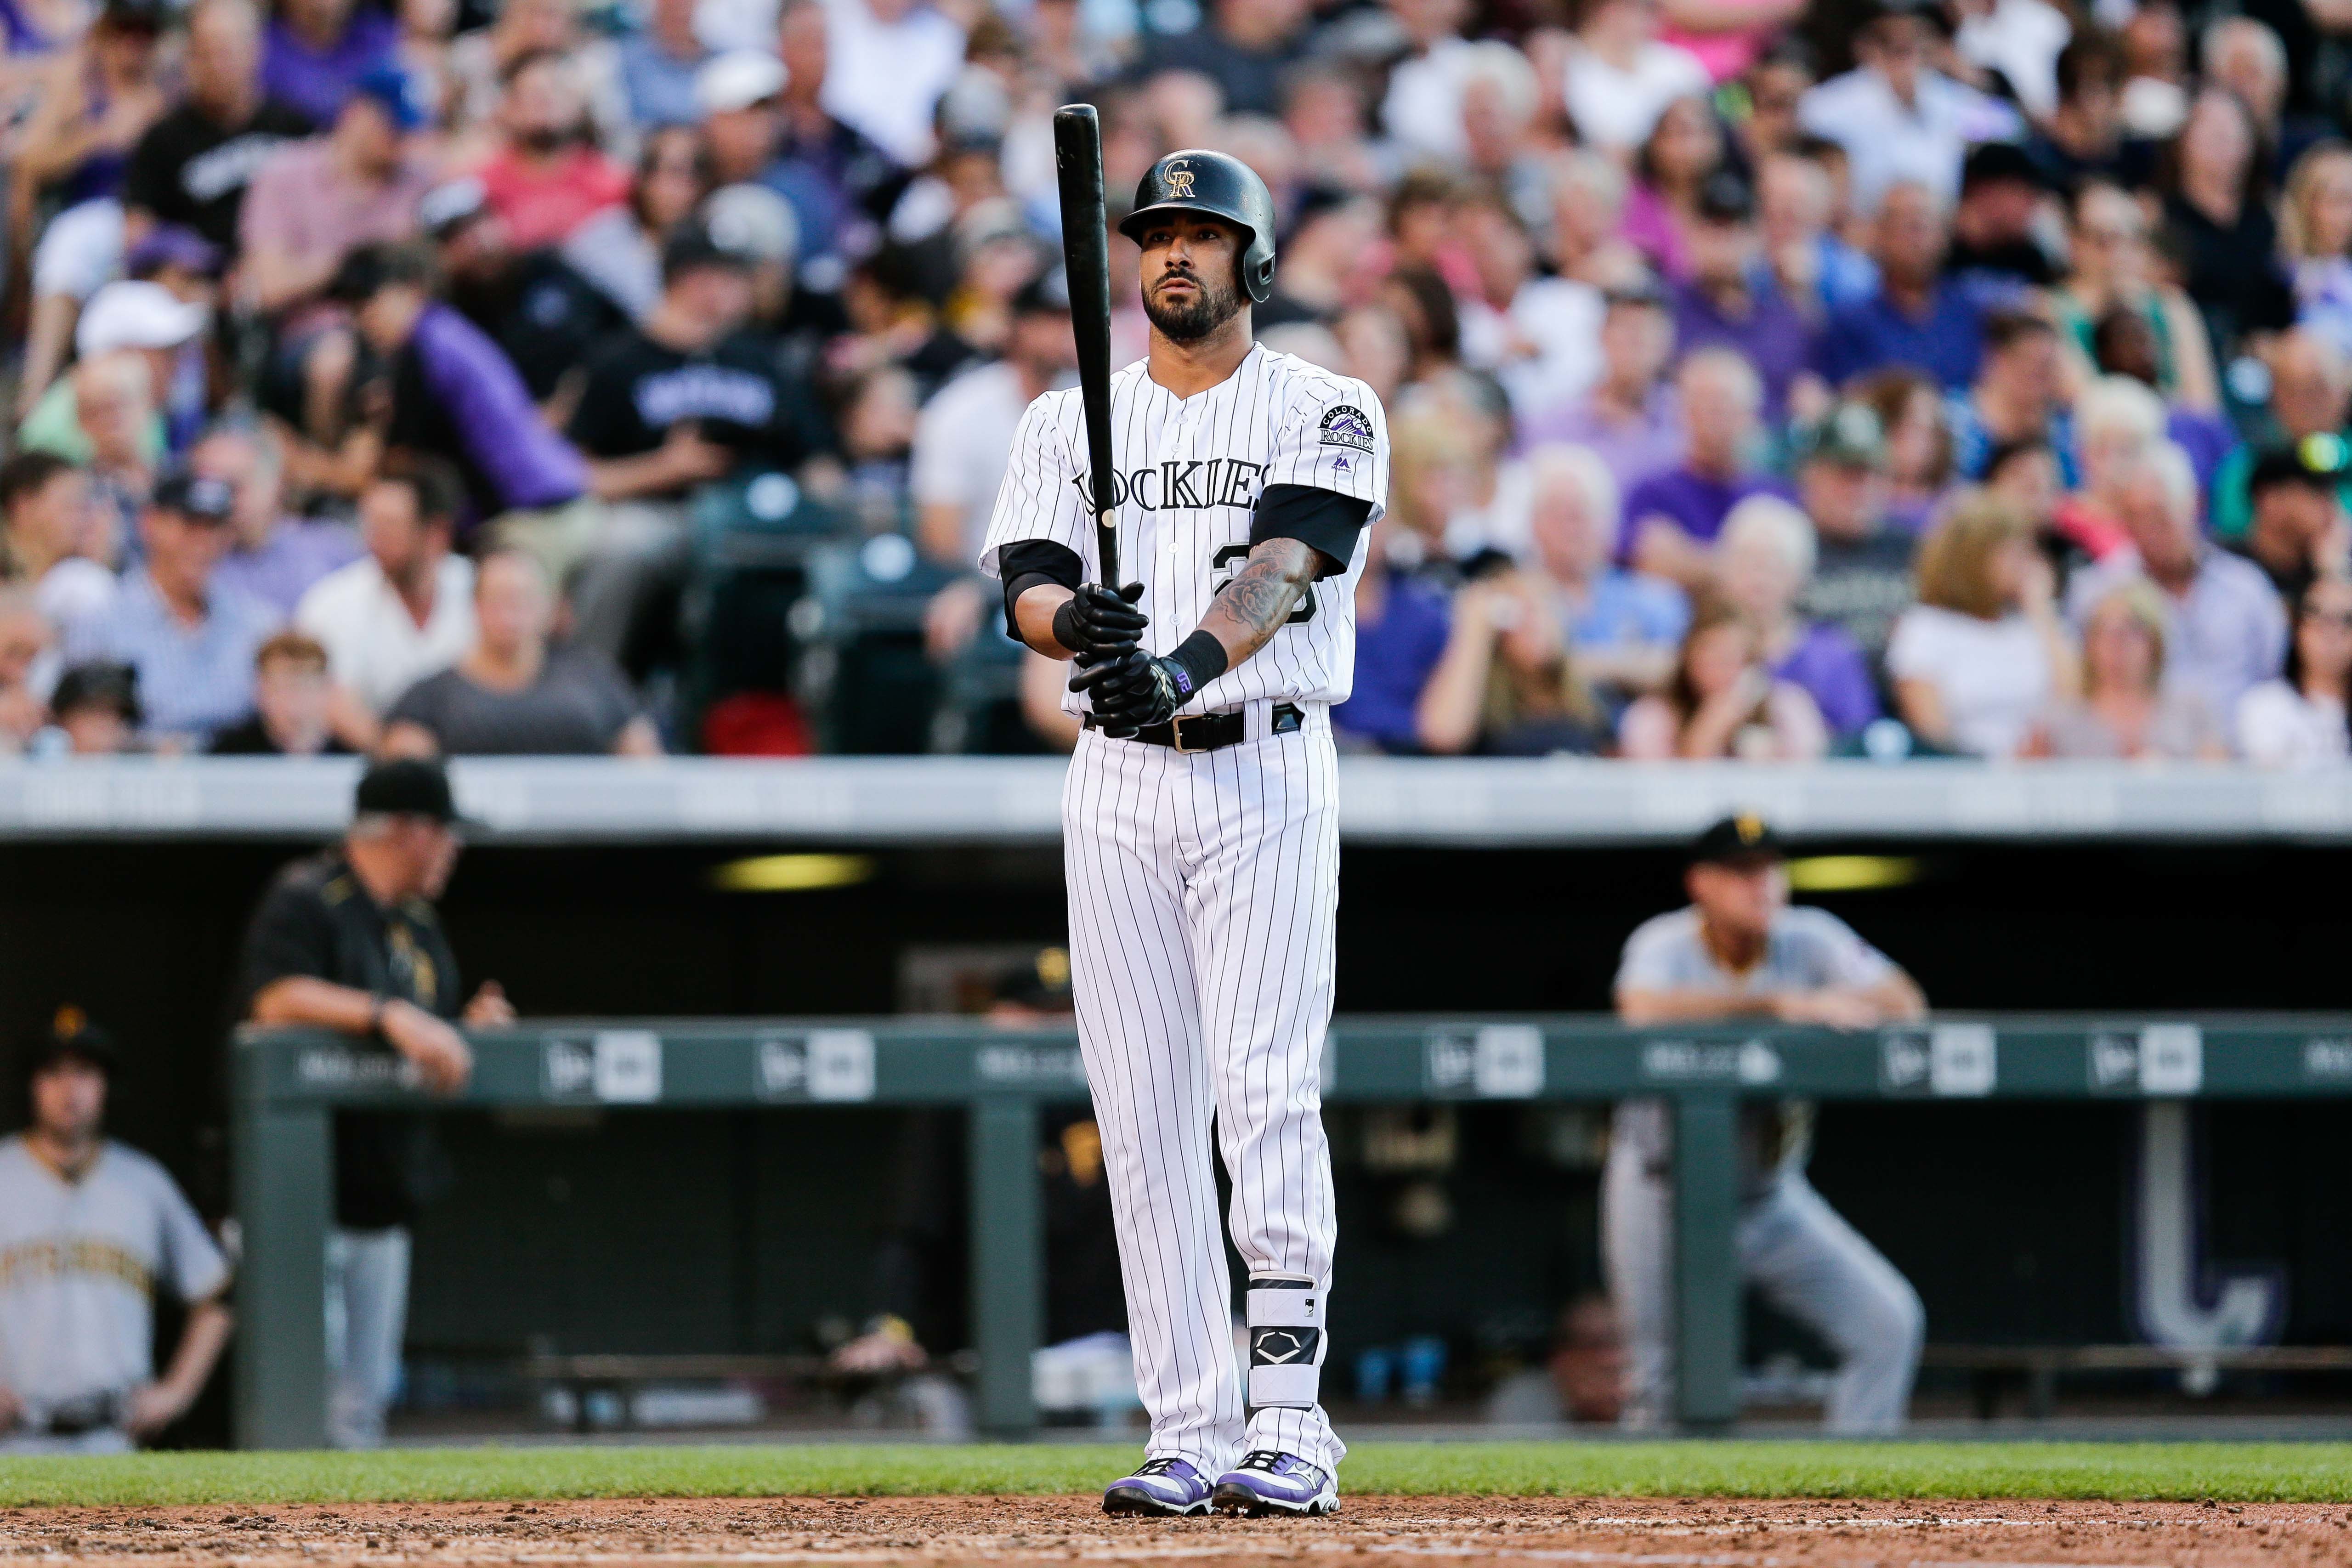 Ian Desmond nominated for Clemente Award